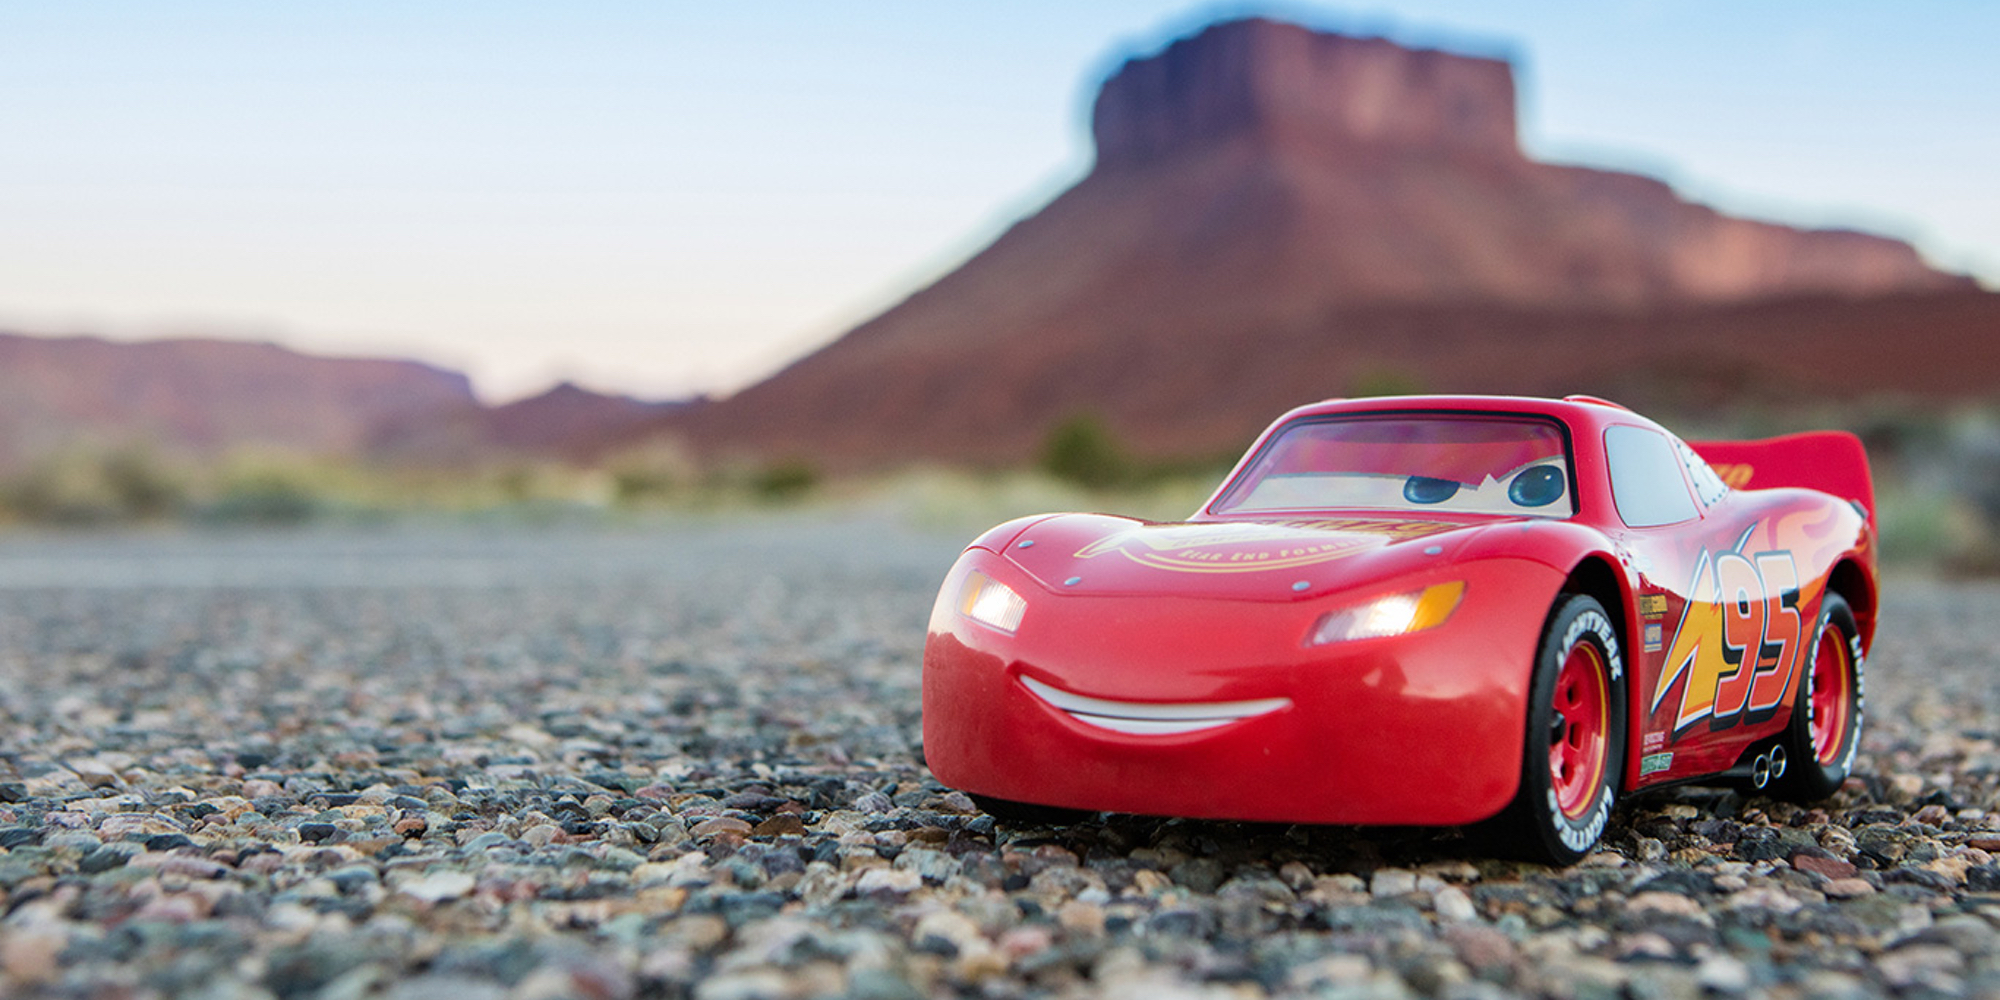 Sphero unveils iOS-controlled Lightning McQueen racer for $300 - 9to5Mac